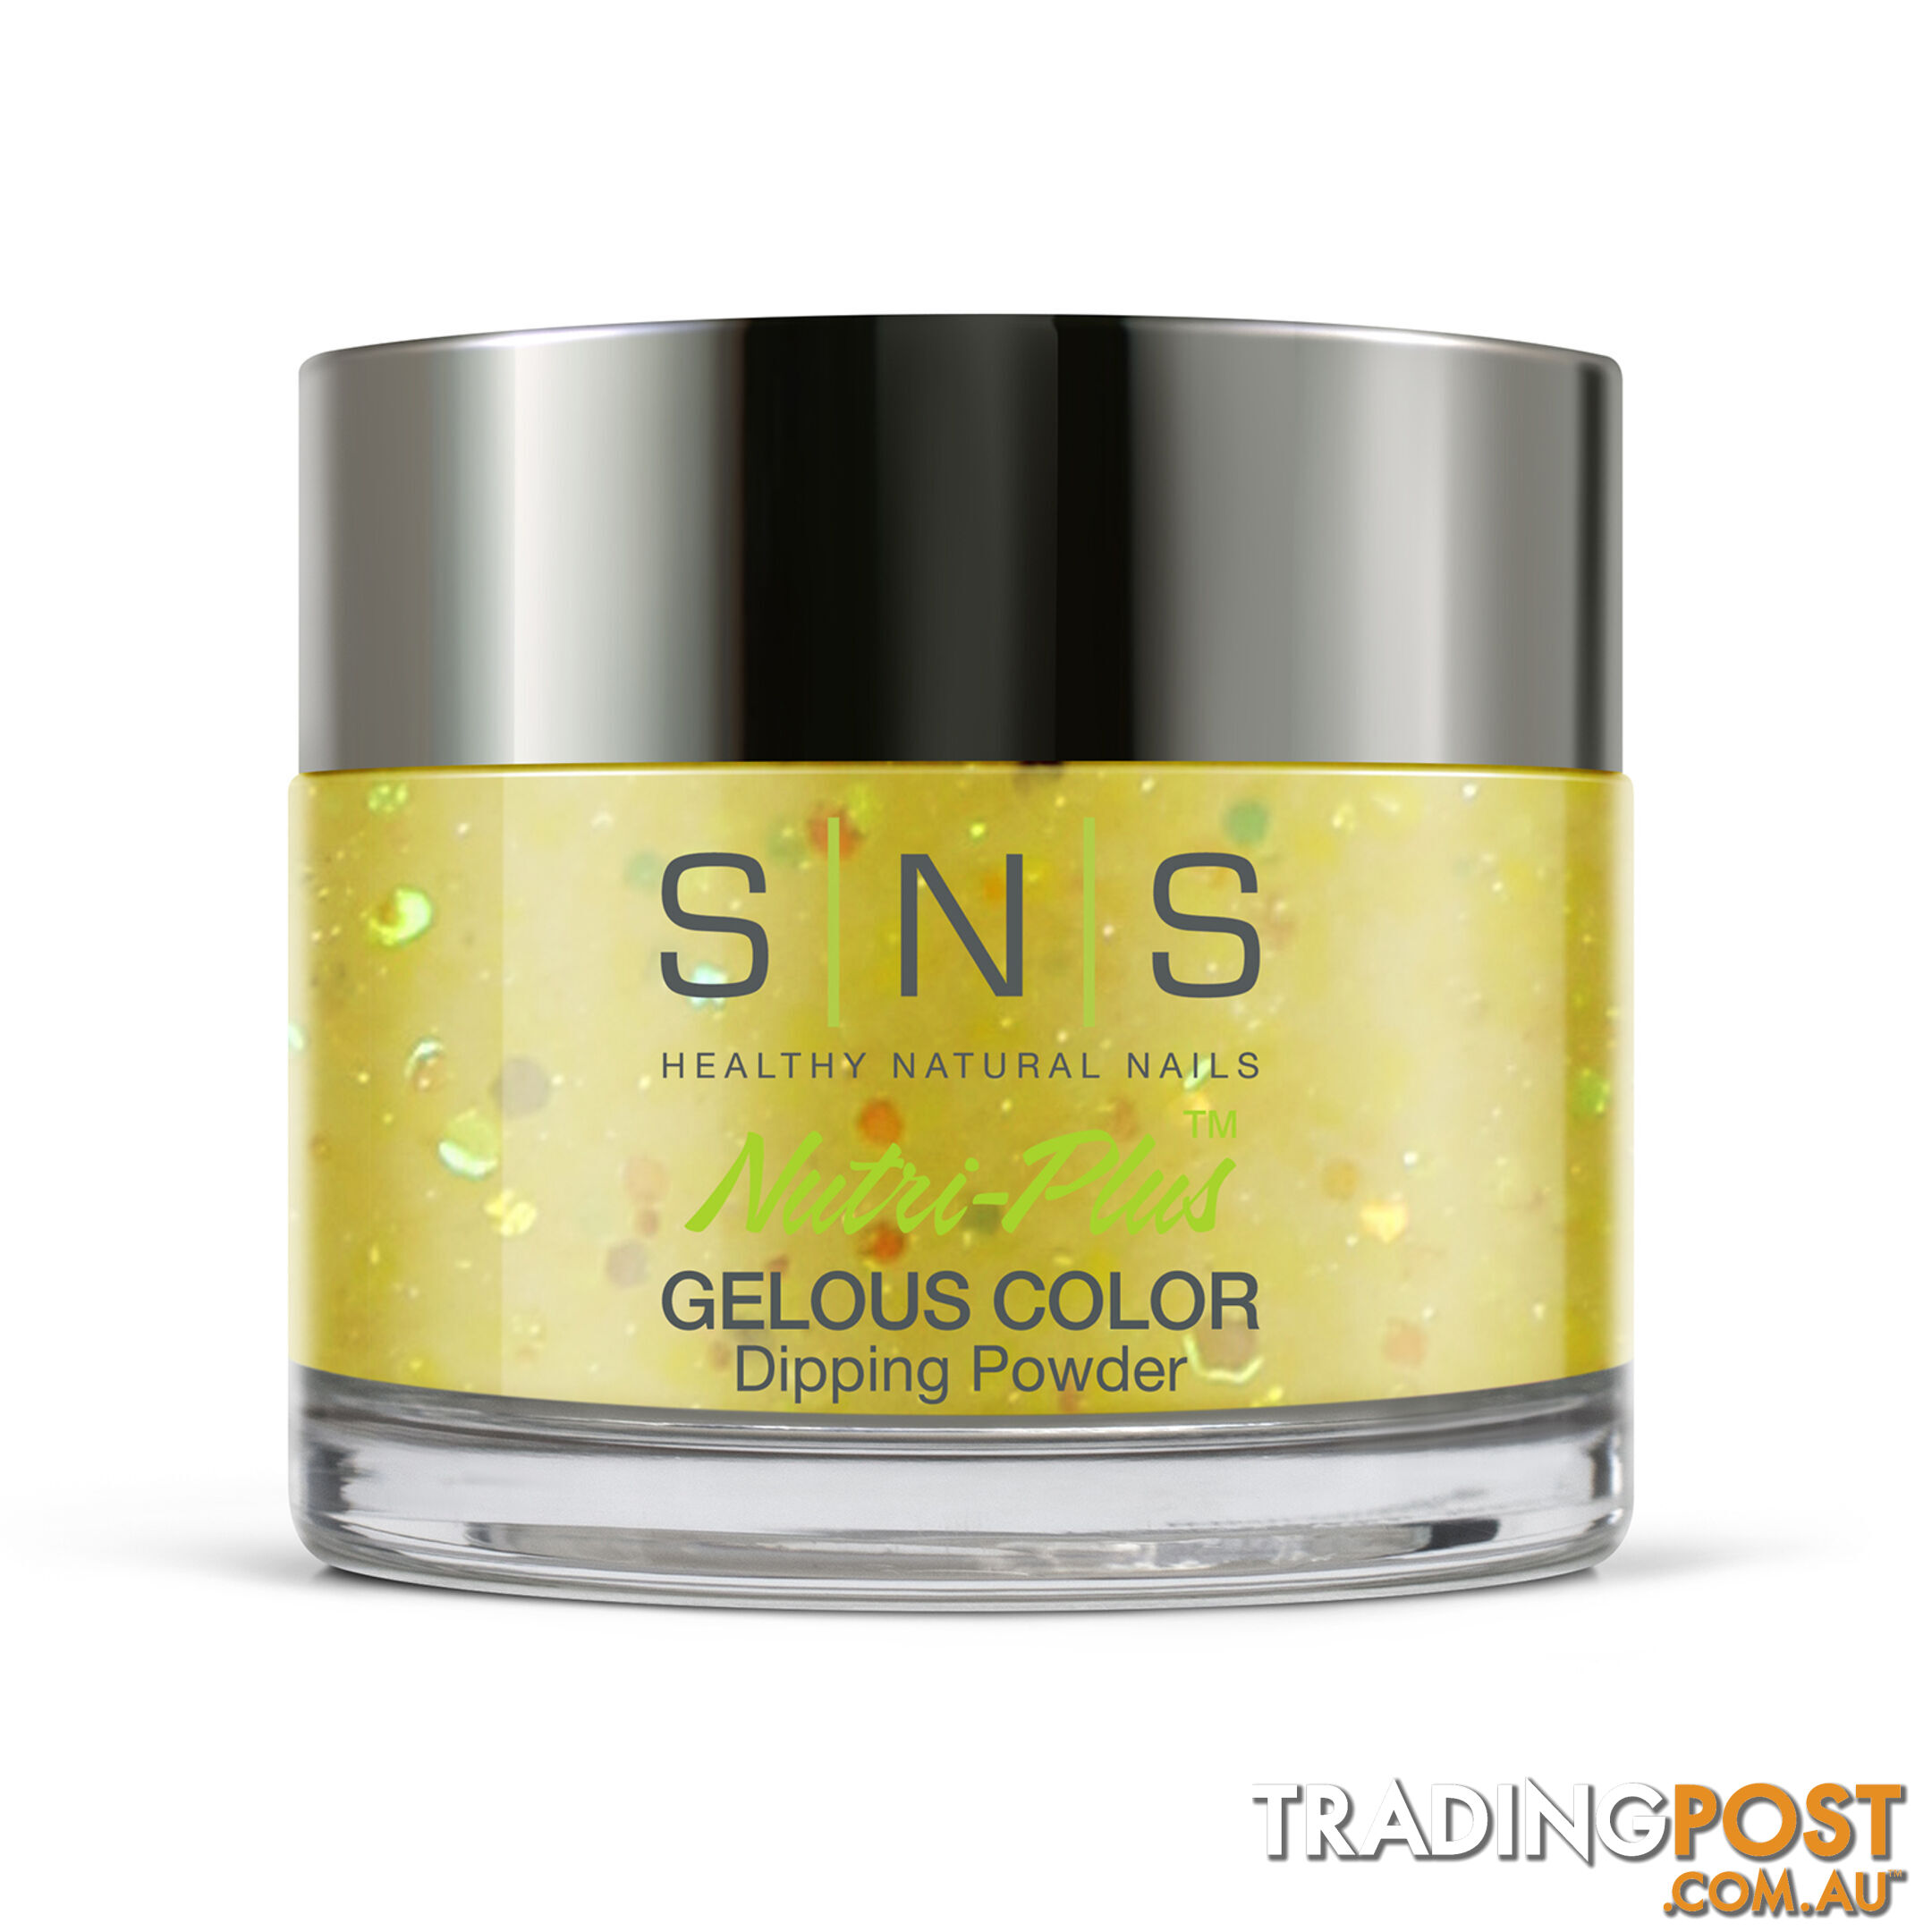 SNS DW33 Gelous Dipping Powder 43g (1.5oz) Tulum by the Sea - 655302858172